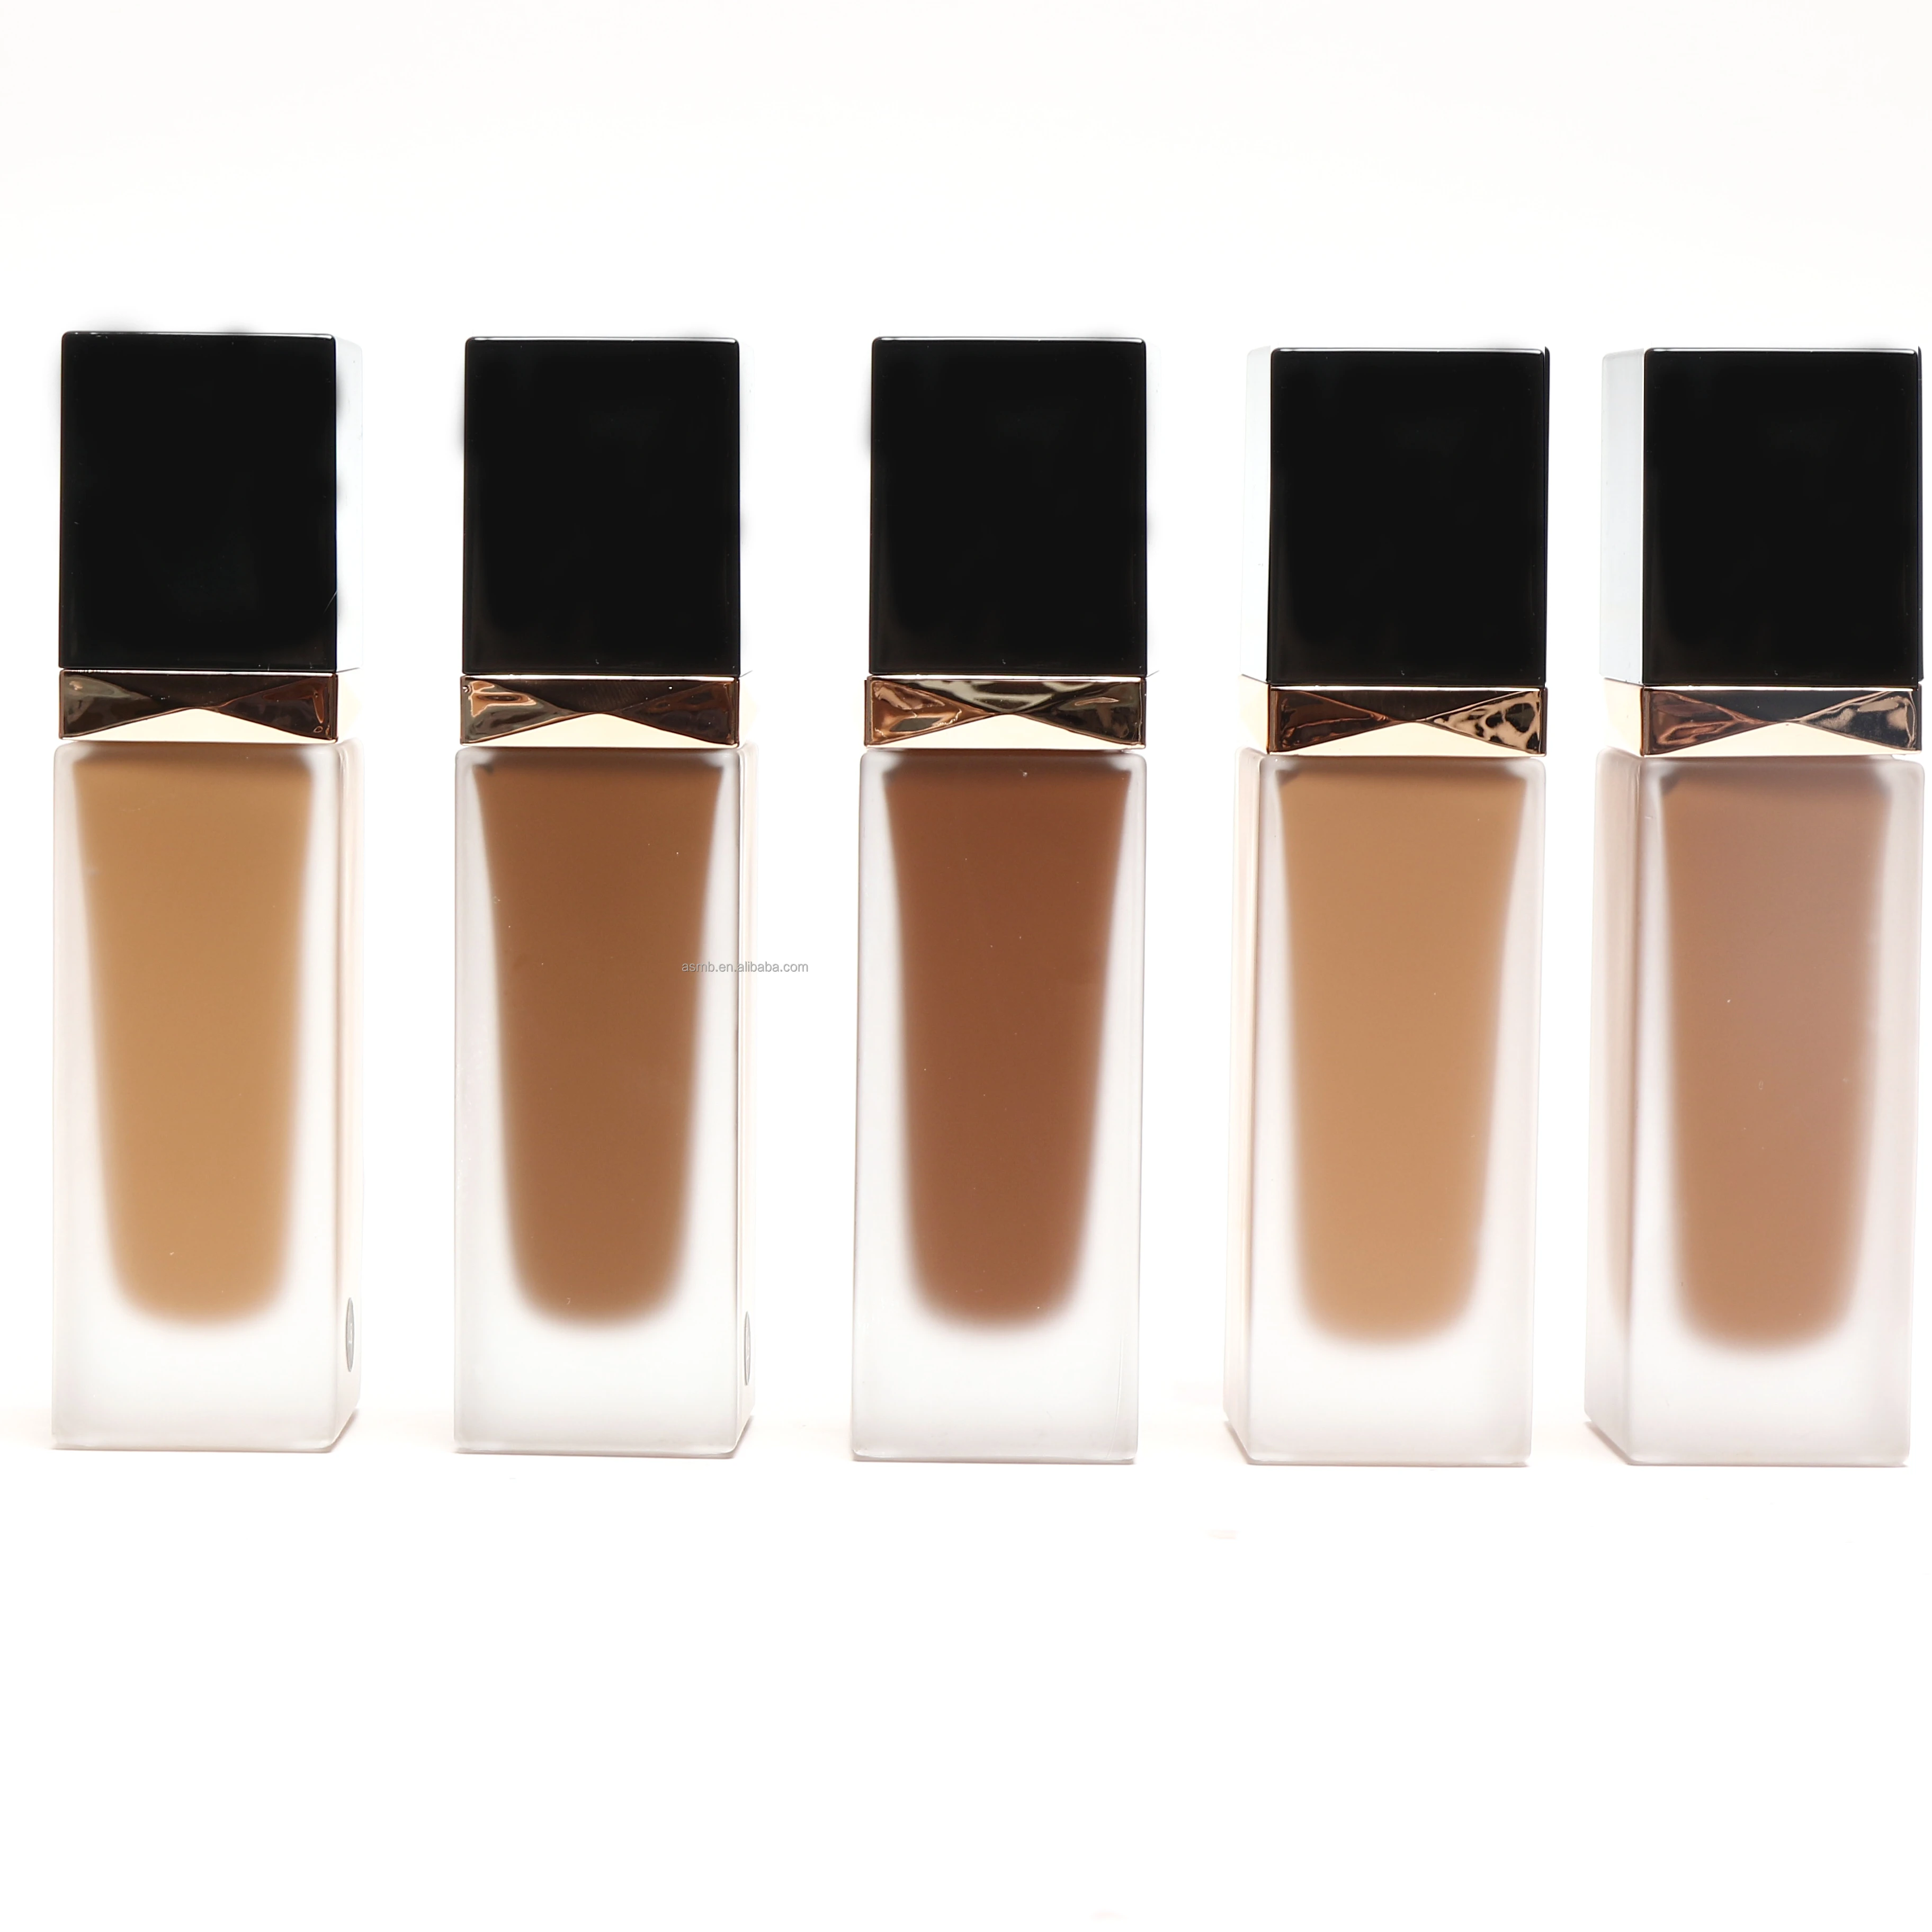 

Hot OEM high quality Face Base liquid Foundation Primer Customized your own brand full coverage foundation private label